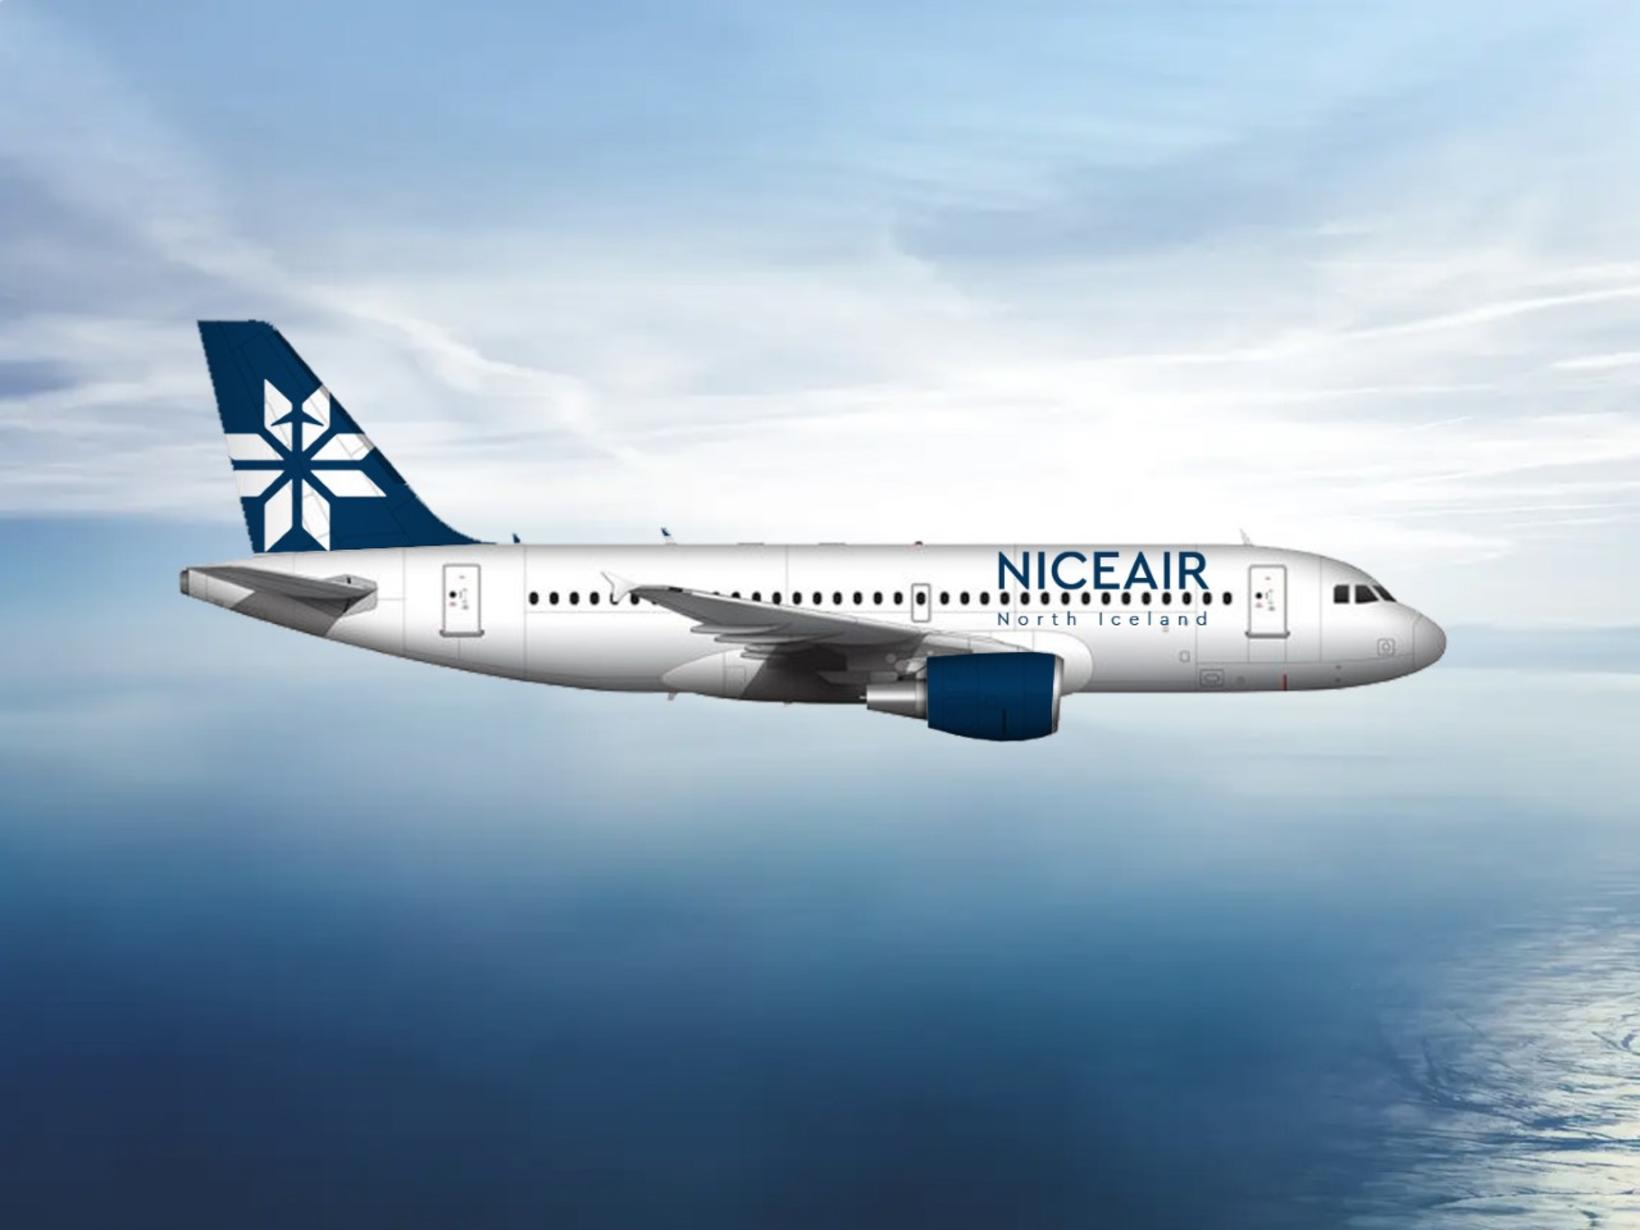 Icelandic airline Niceair filing for bankruptcy